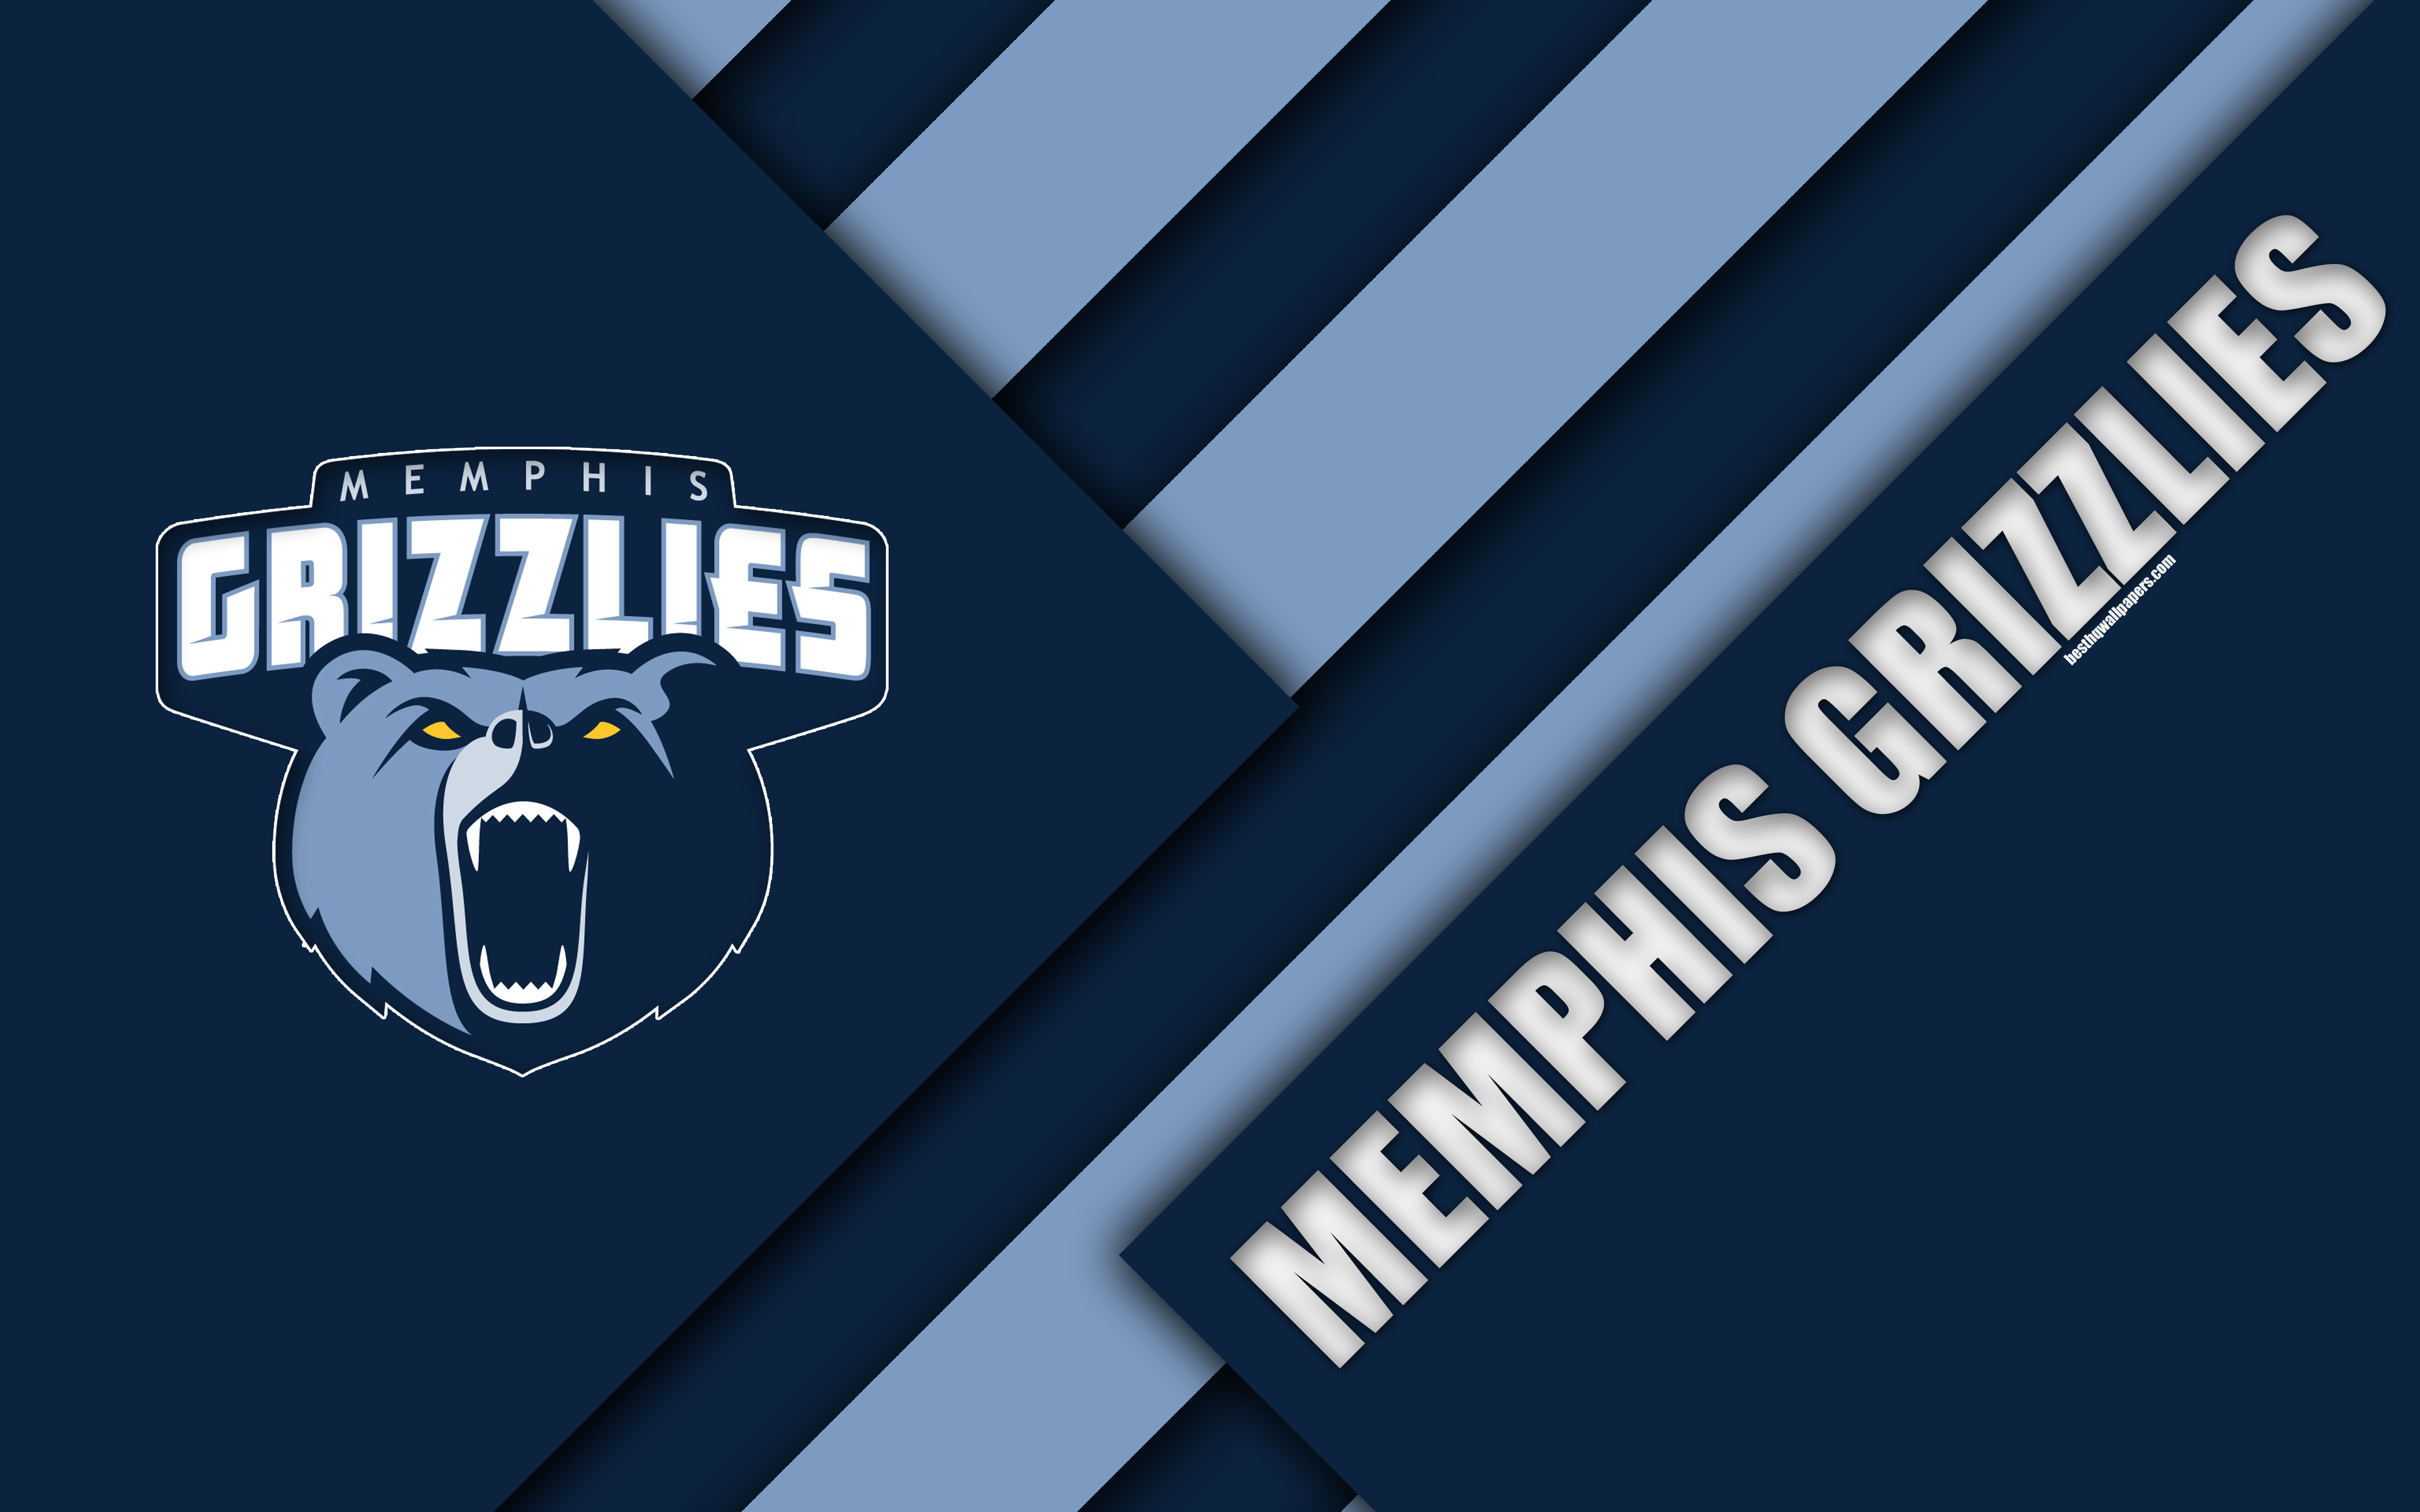 I made some wallpaper for some players Let me know what you guys think   rmemphisgrizzlies